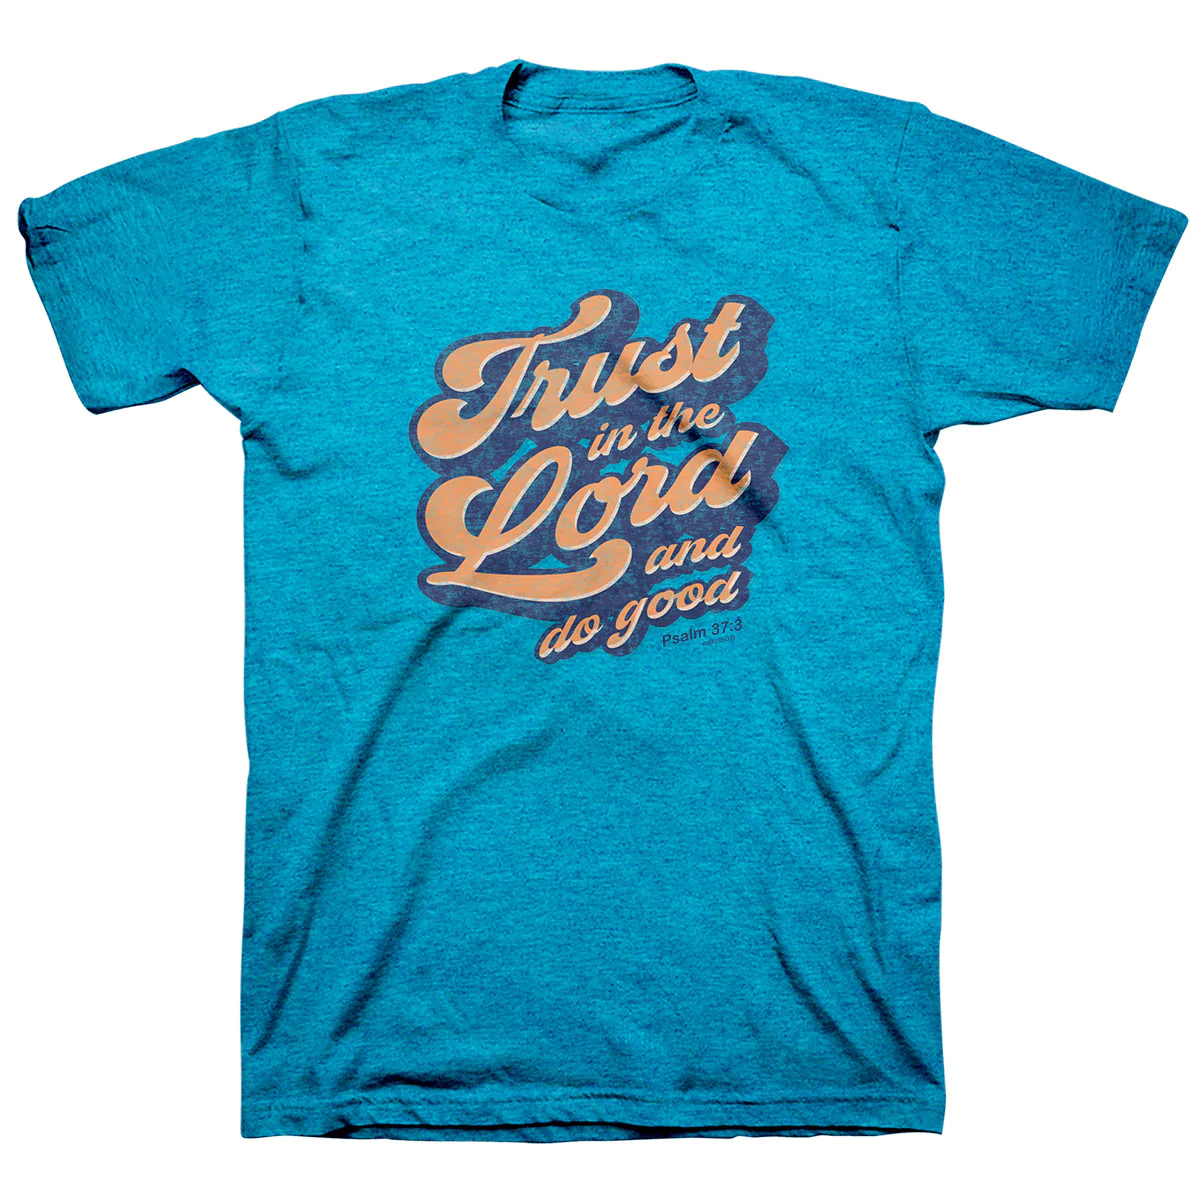 Trust In The Lord (Psalm 37:3) T-Shirt - APT4067